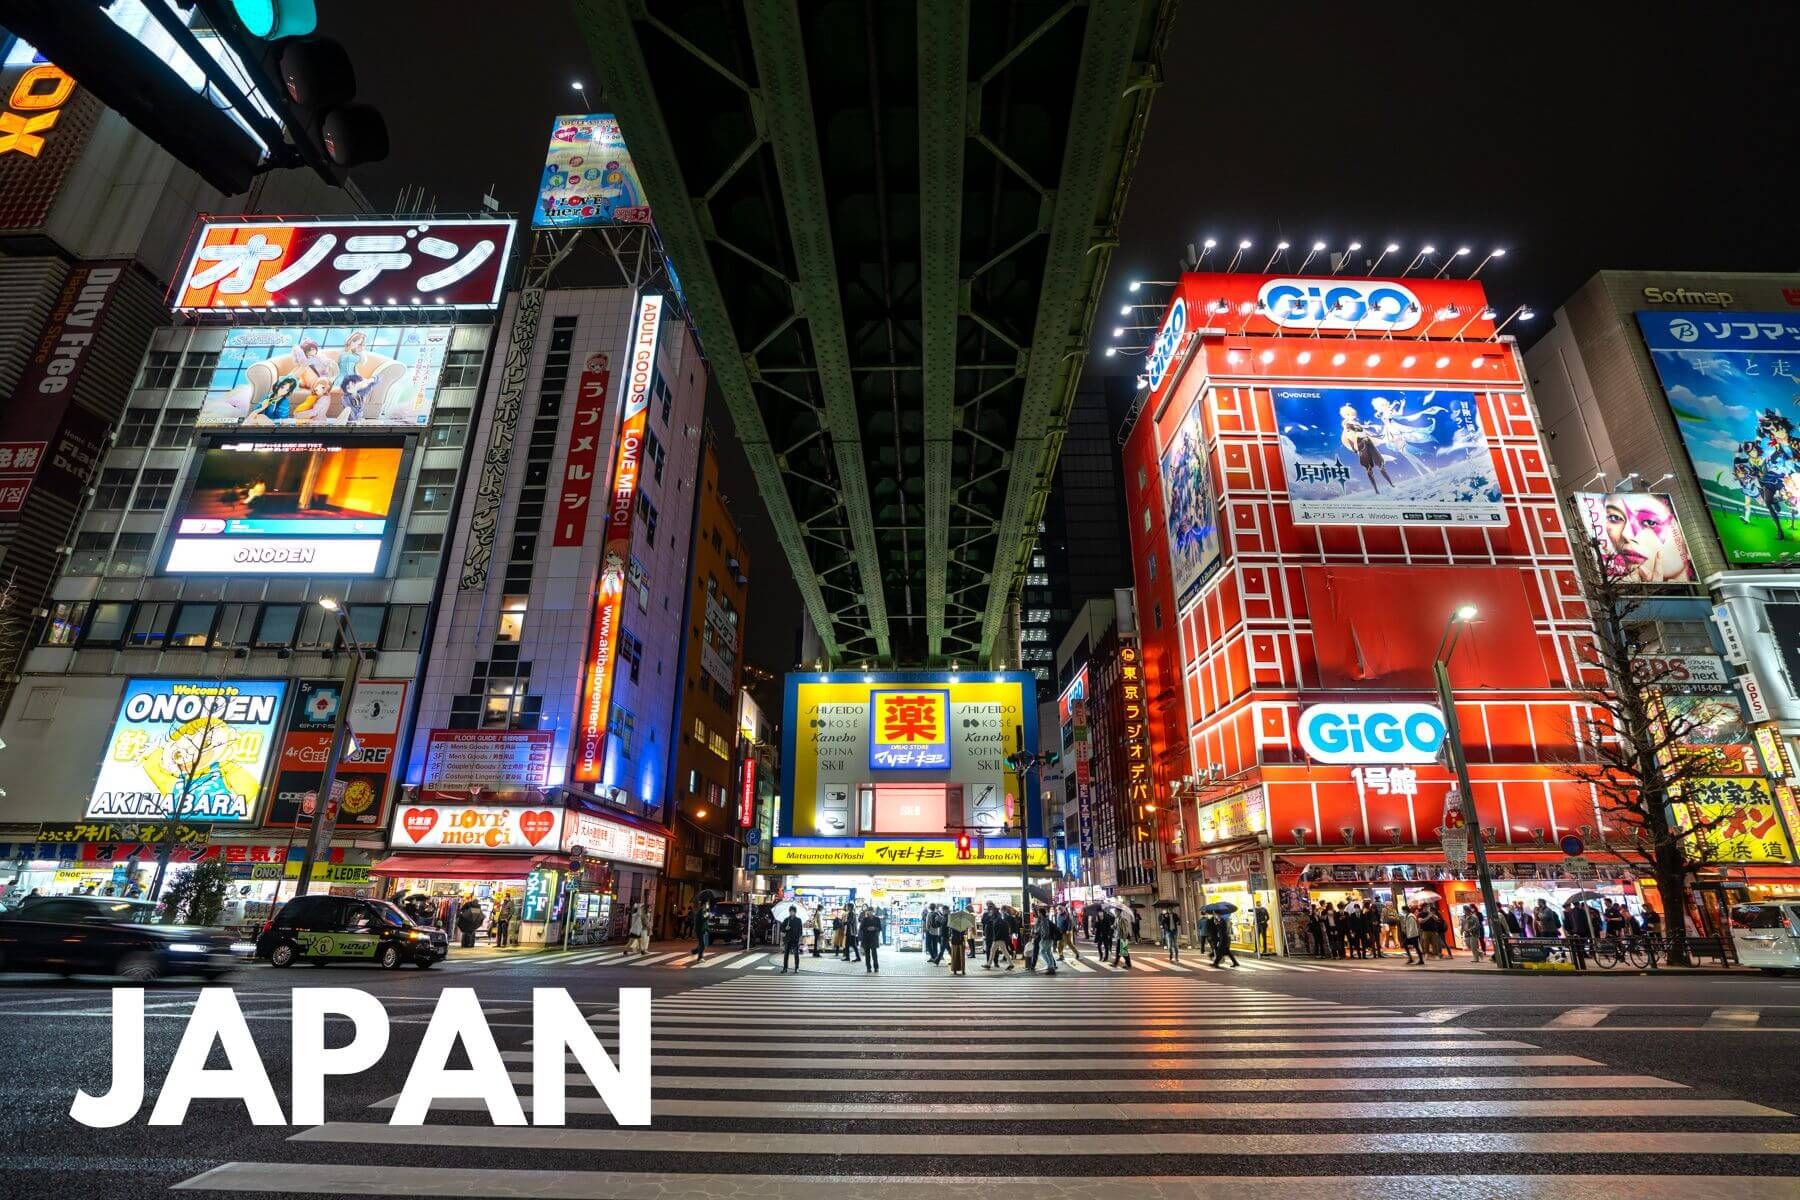 Photo of Akihabara in Japan at night famous video game area with lots of bright lights on tall buildings next to a bridge and a pedestrian crossing with the word Japan written on the photo